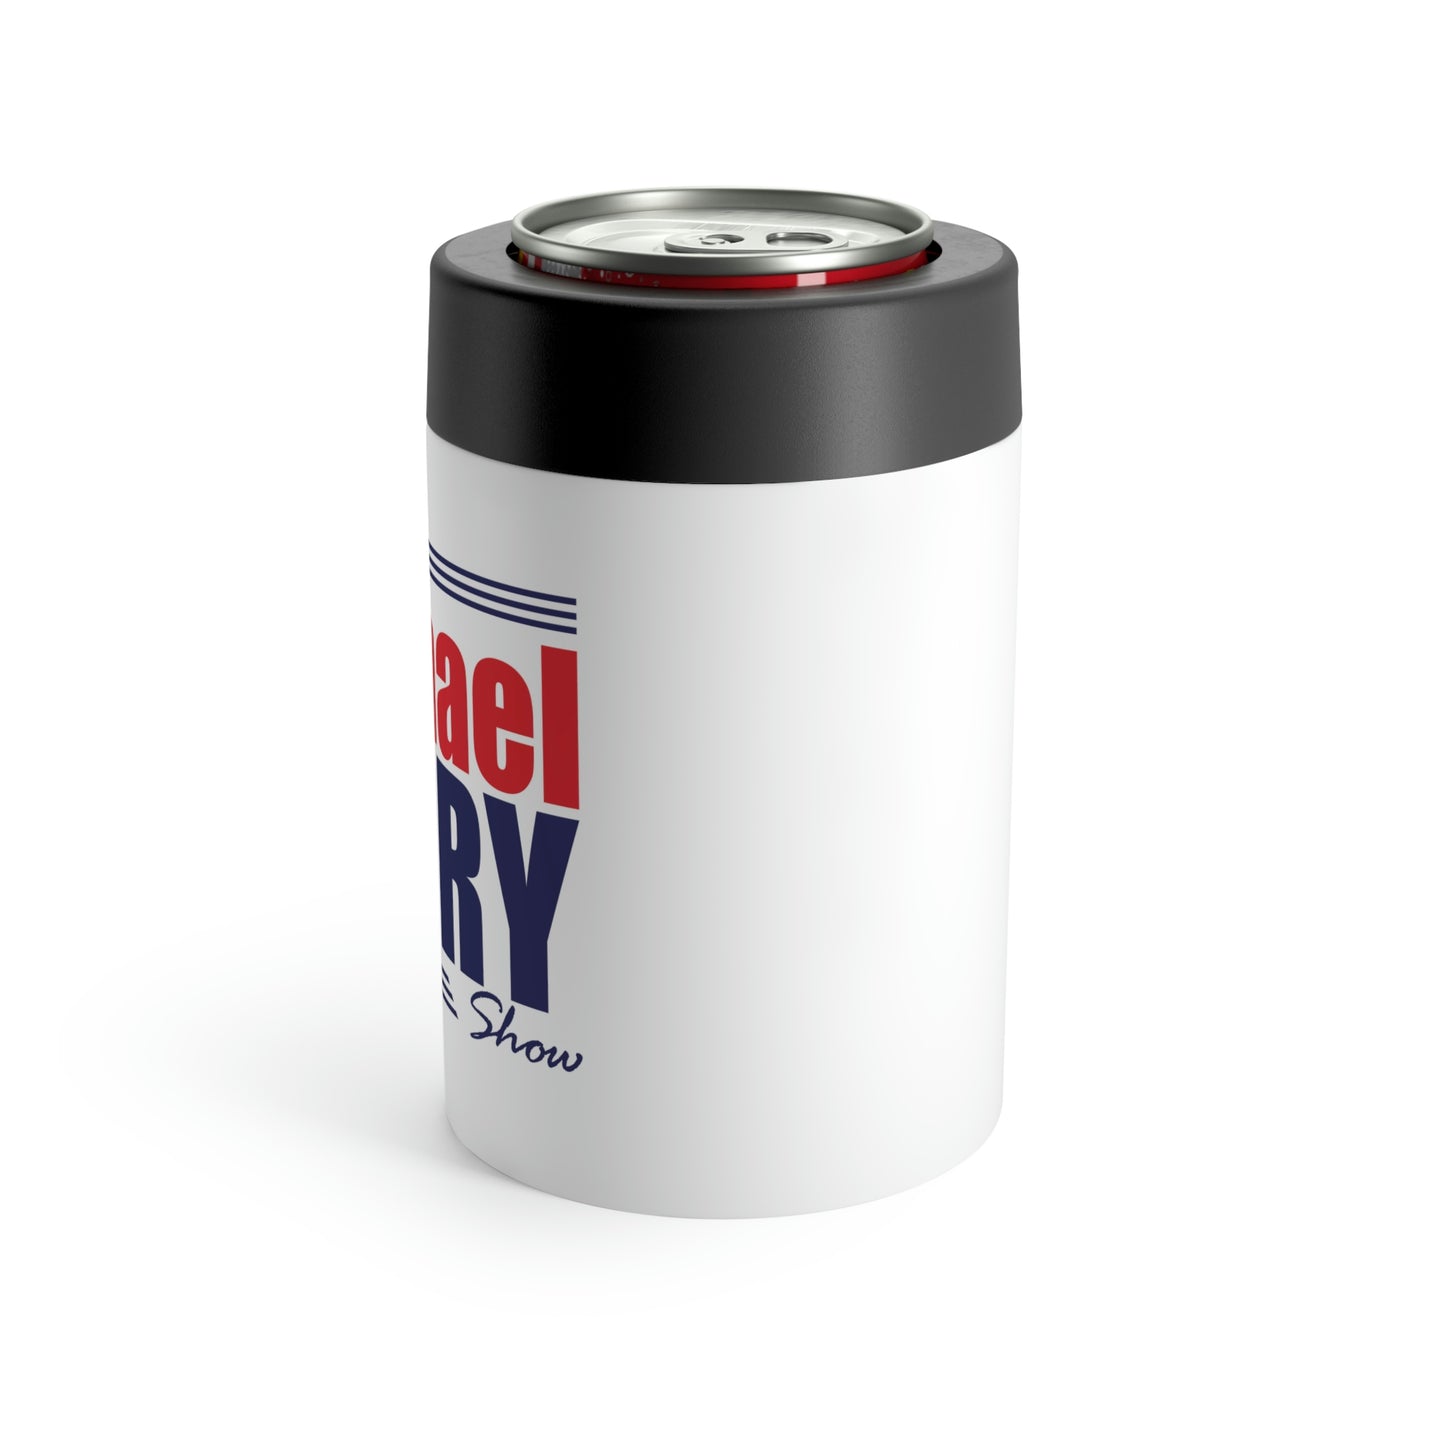 Official “Pop-A-Top” INSULATED Can Holder for Friday Drive Home Revelry